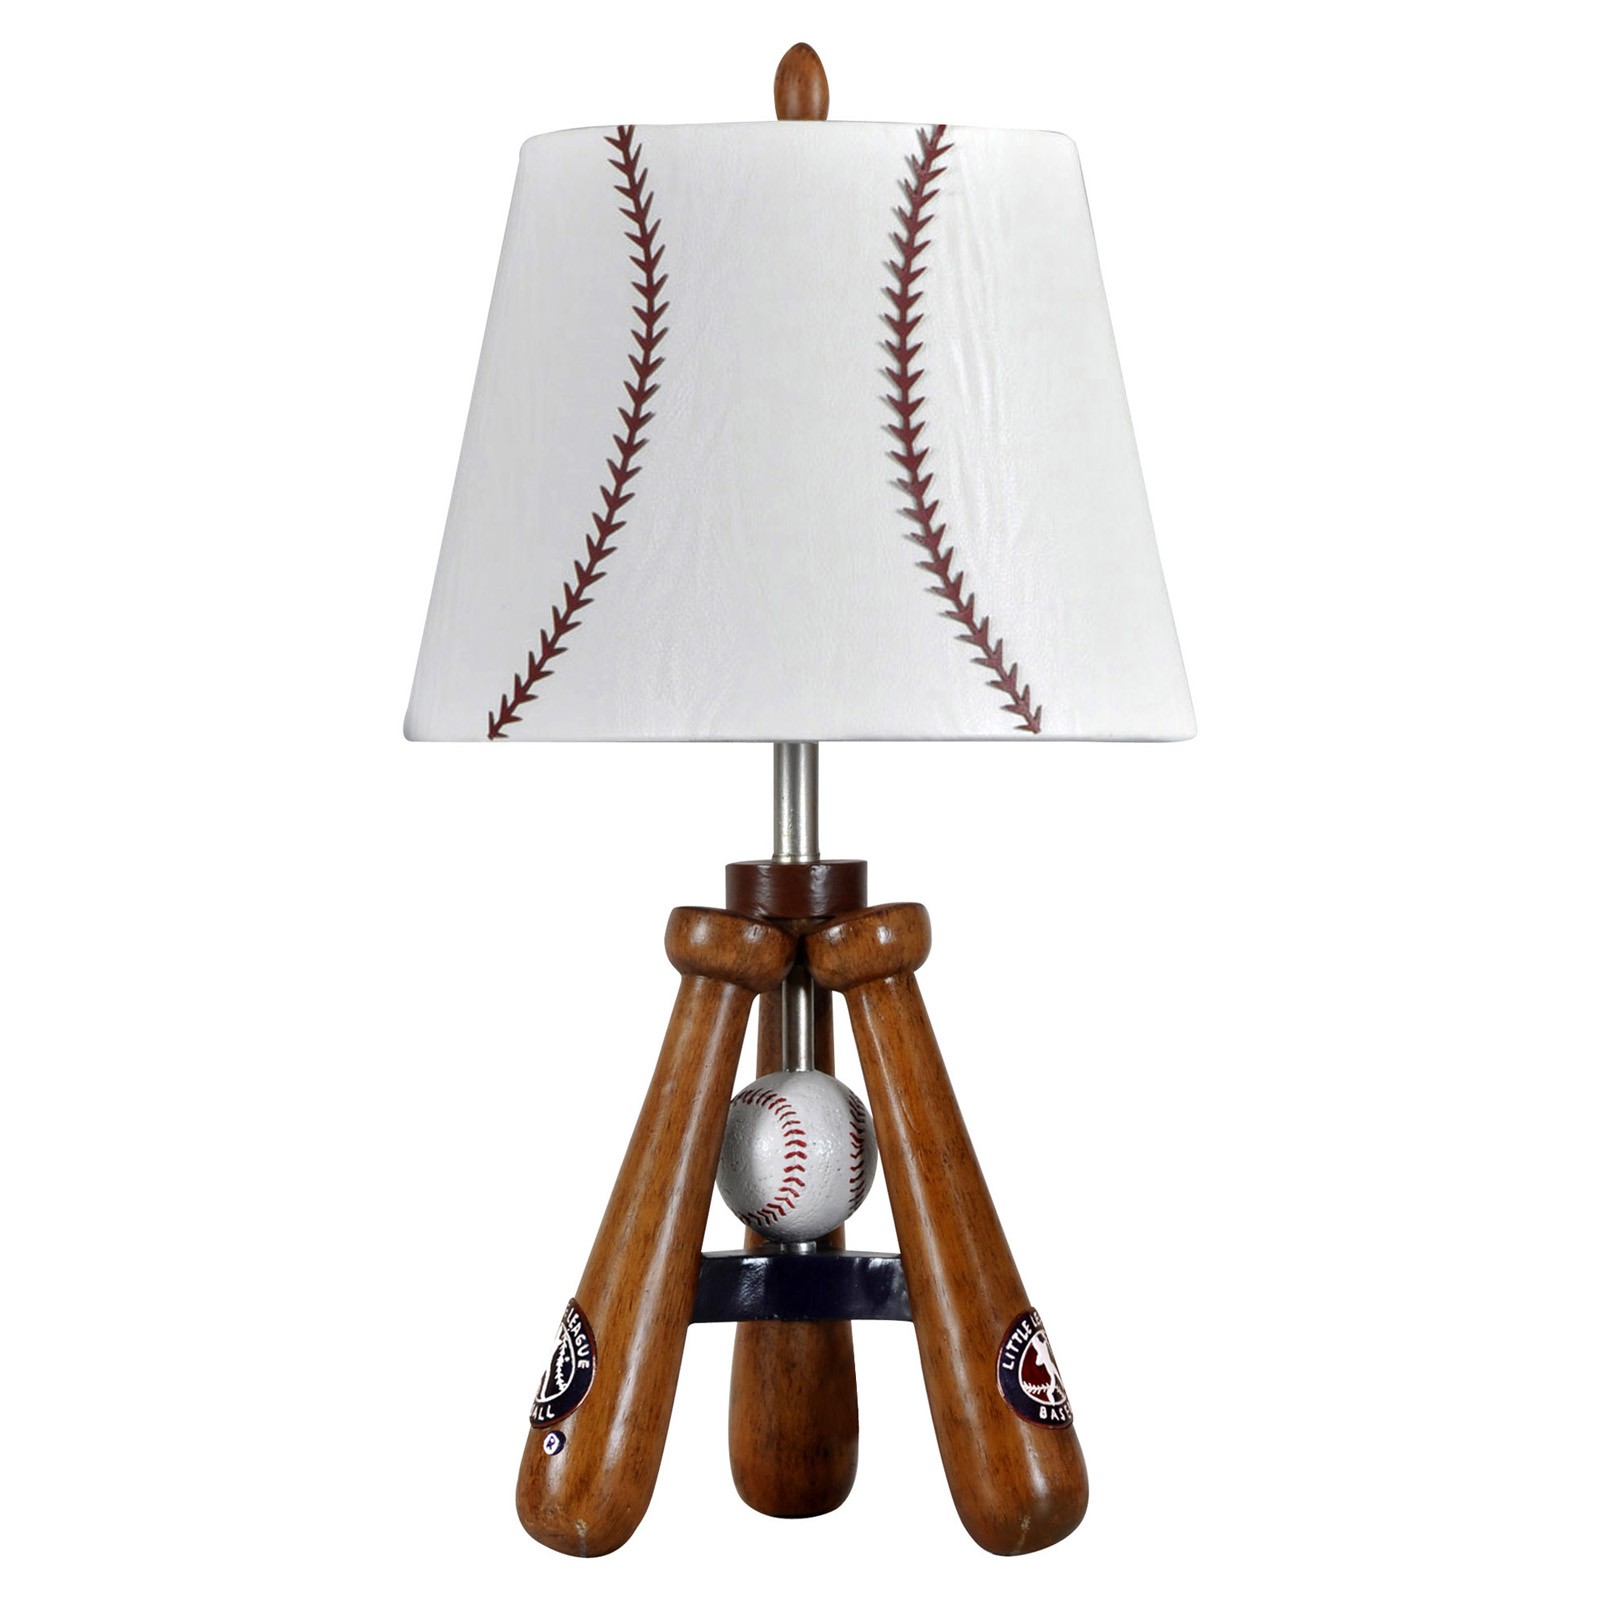 Style craft baseball theme lamp with bat and ball stand